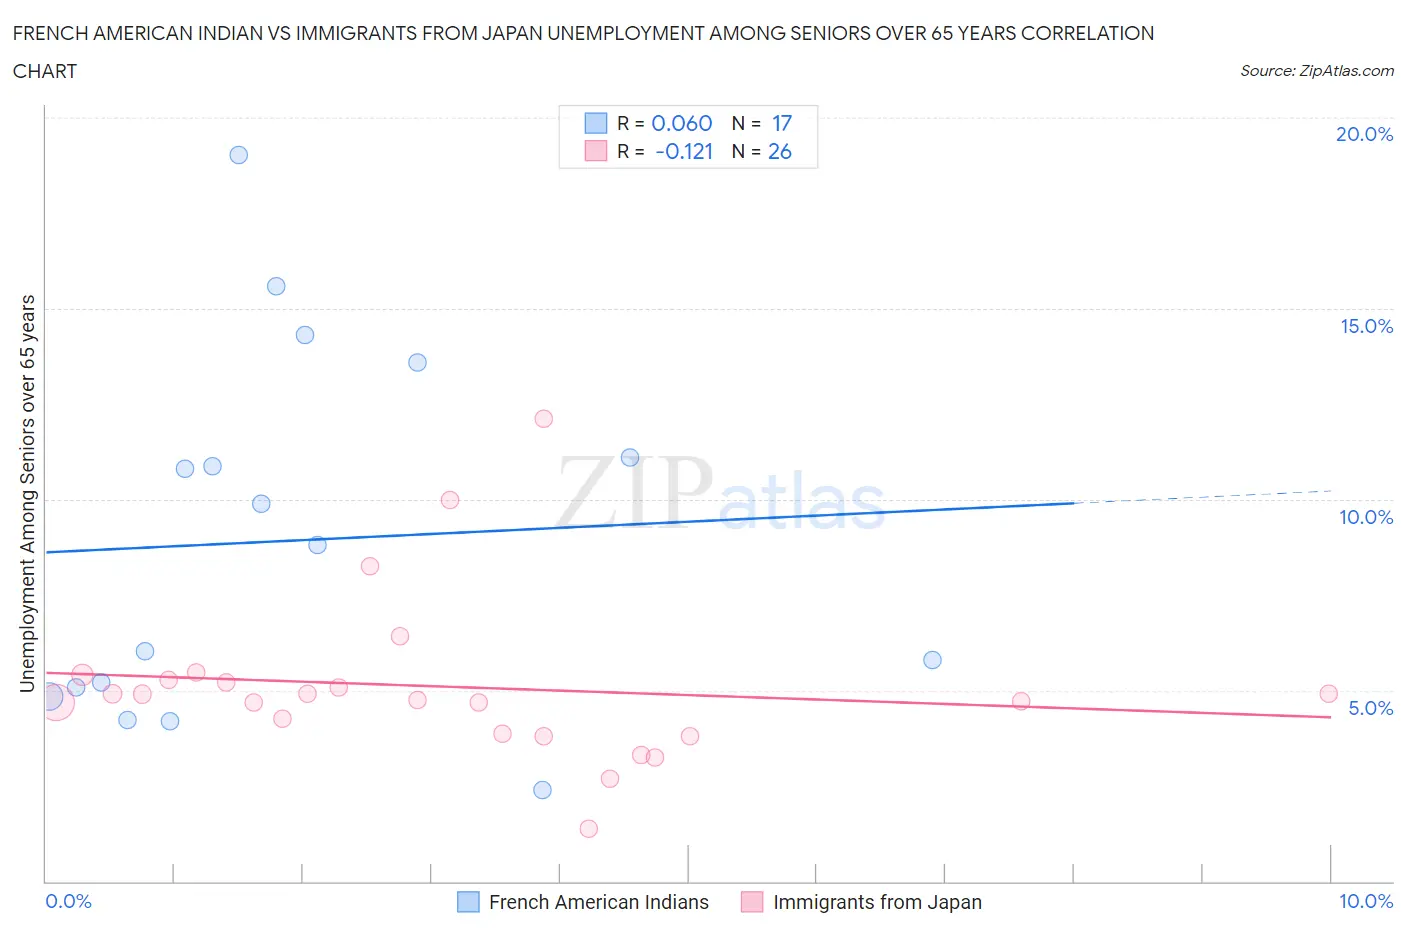 French American Indian vs Immigrants from Japan Unemployment Among Seniors over 65 years